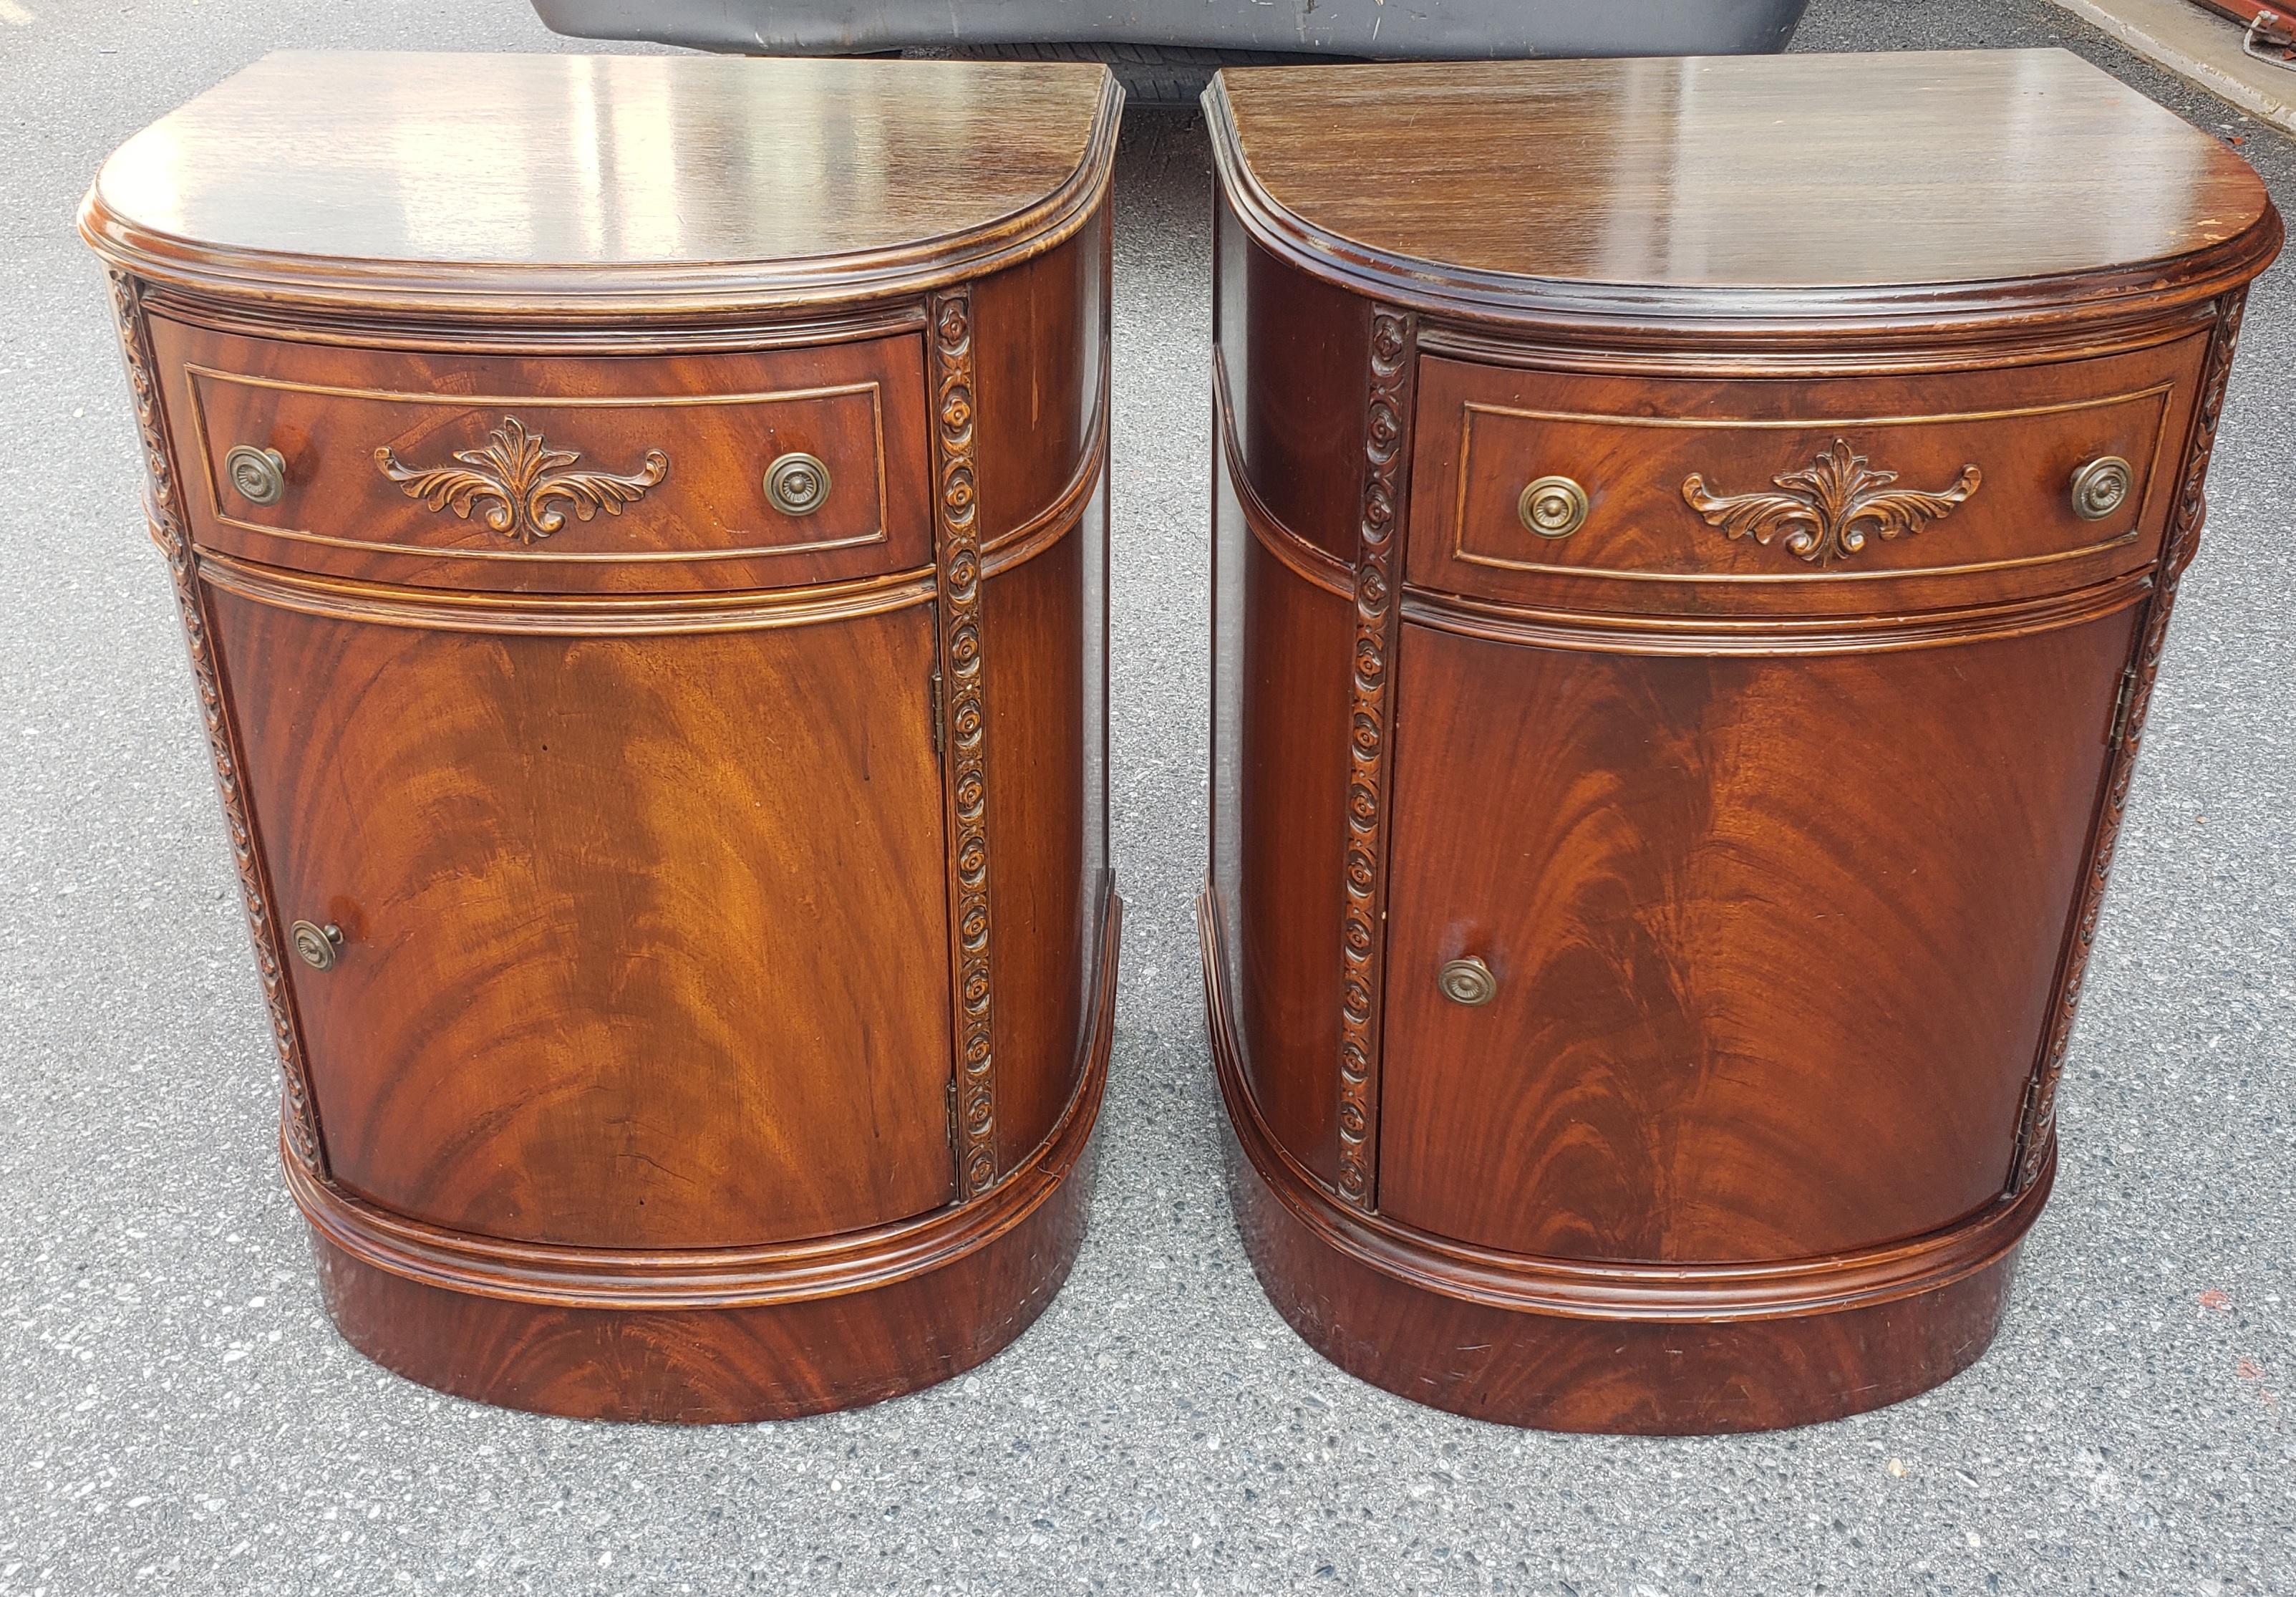 A gorgeous, rare Pair of  Early 20th Century American Empire Bow Front Flame Mahogany Bedside Cabinet Tables with Beatiful craving decorations.
Measure 23 in width, 18